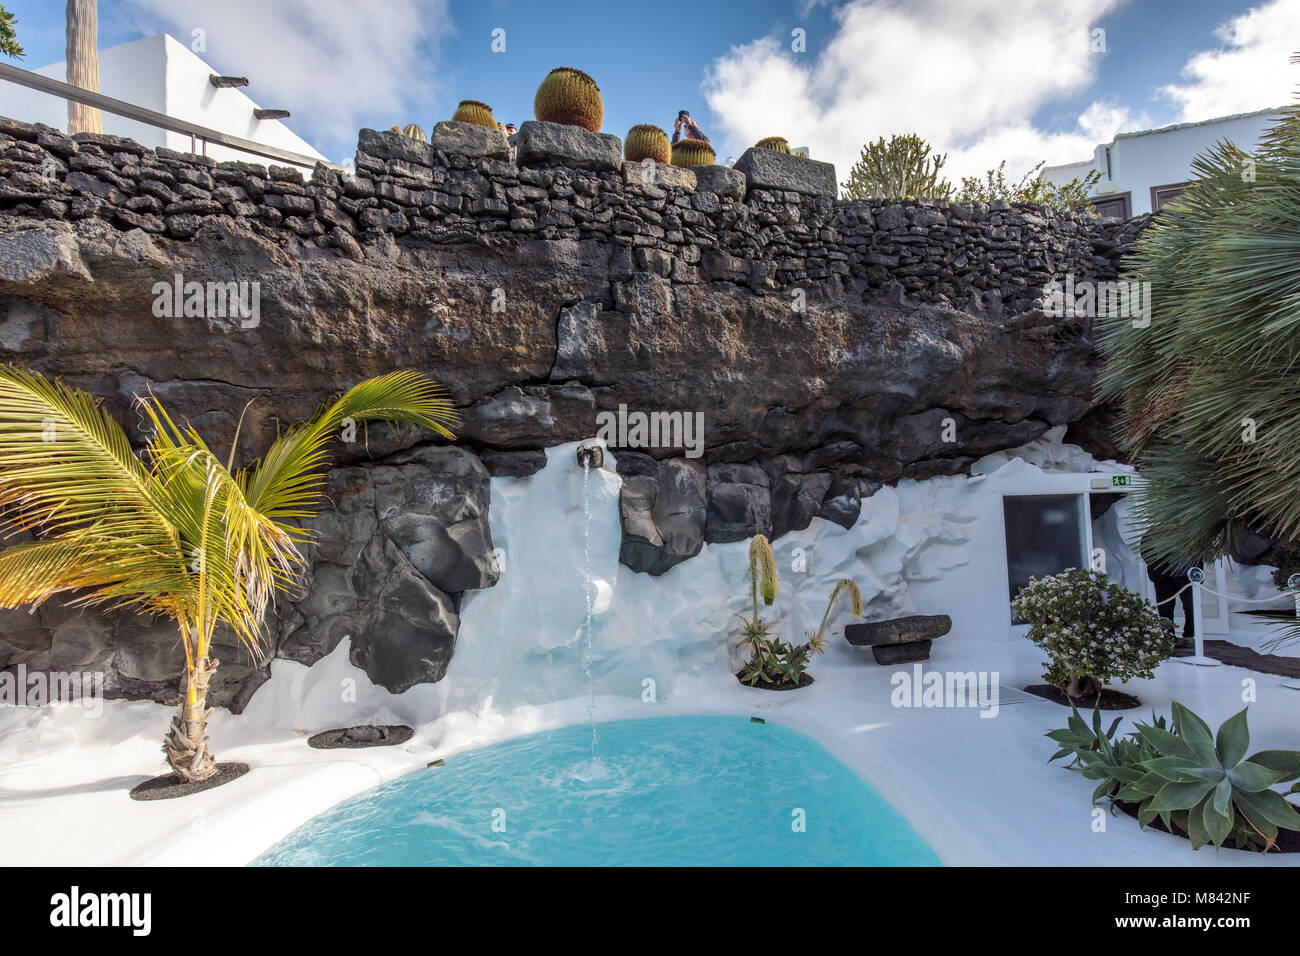 The César Manrique Foundation near Tahiche, Lanzarote is the former home of Cesar Manrique. Today it is a museum. Stock Photo